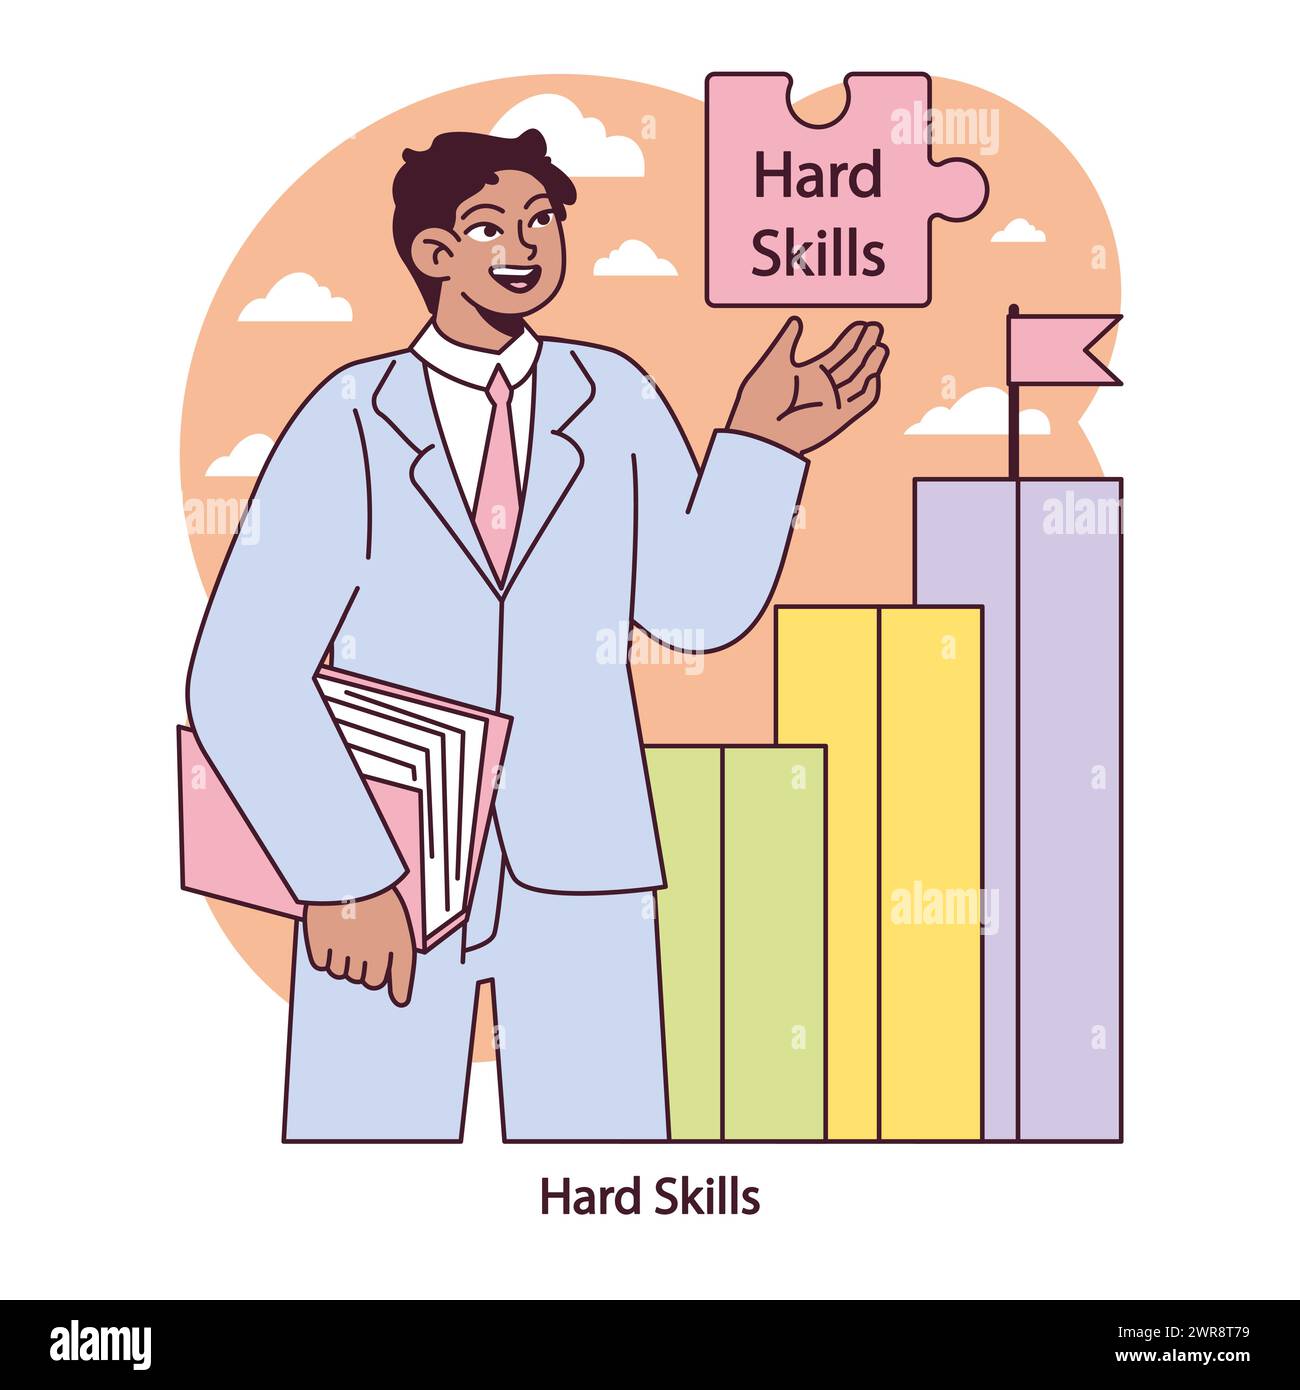 Hard Skills showcase. Confident professional presents technical abilities as key career assets. Skill proficiency charted for success. Vector illustration. Stock Vector